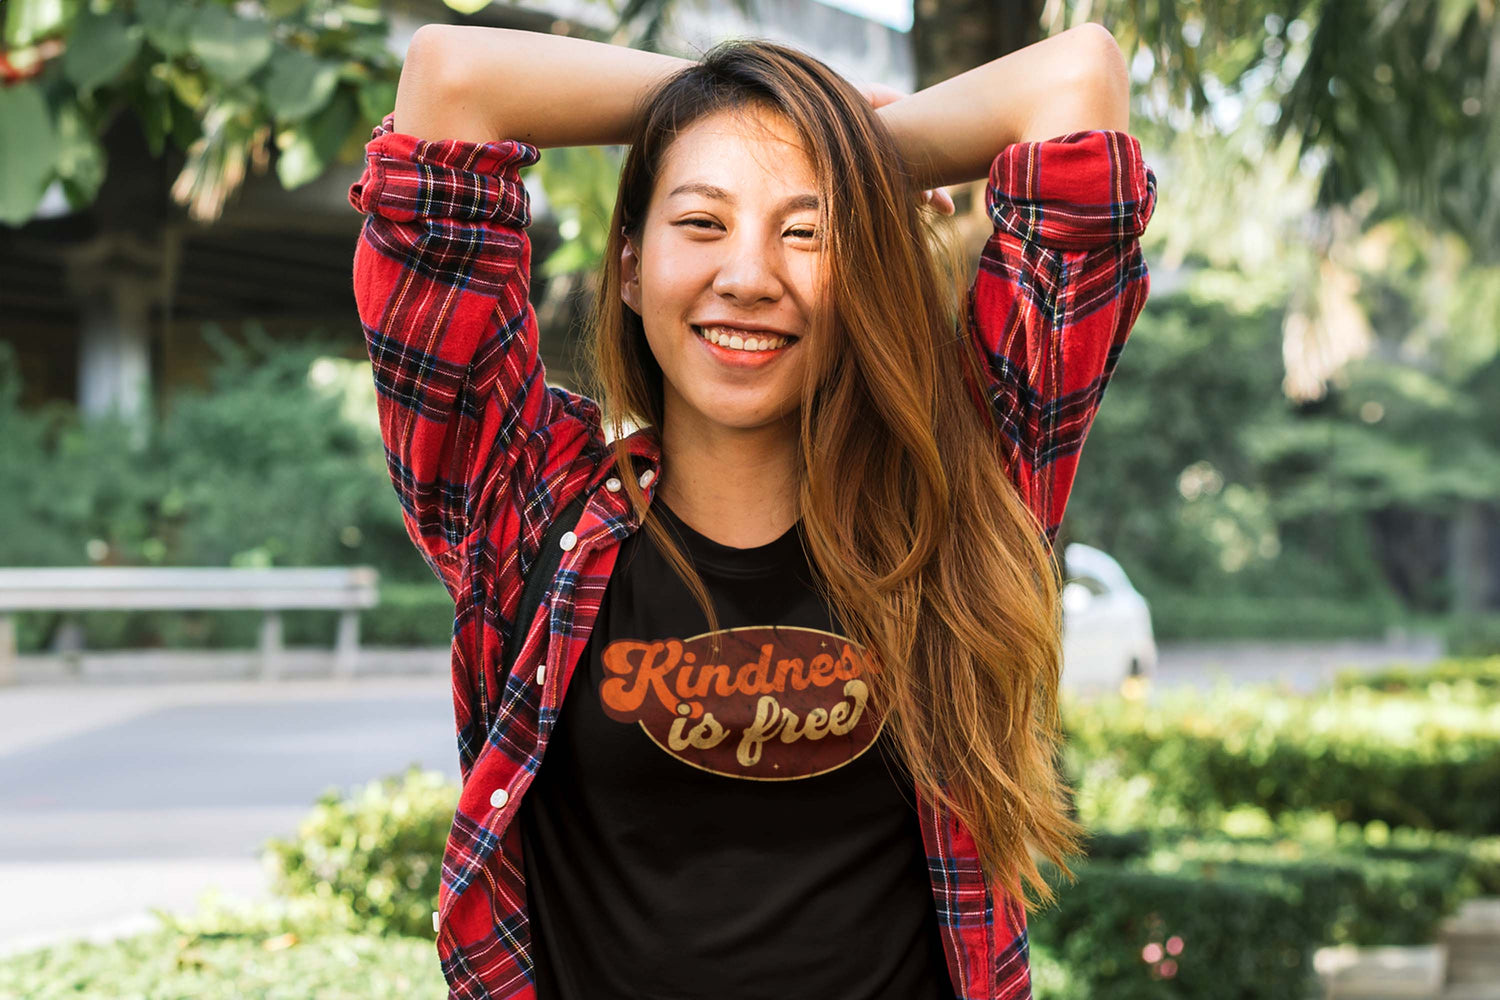 A woman wearing a shirt that says "Kindness is Free" in a script font in retro colors inside an oval.